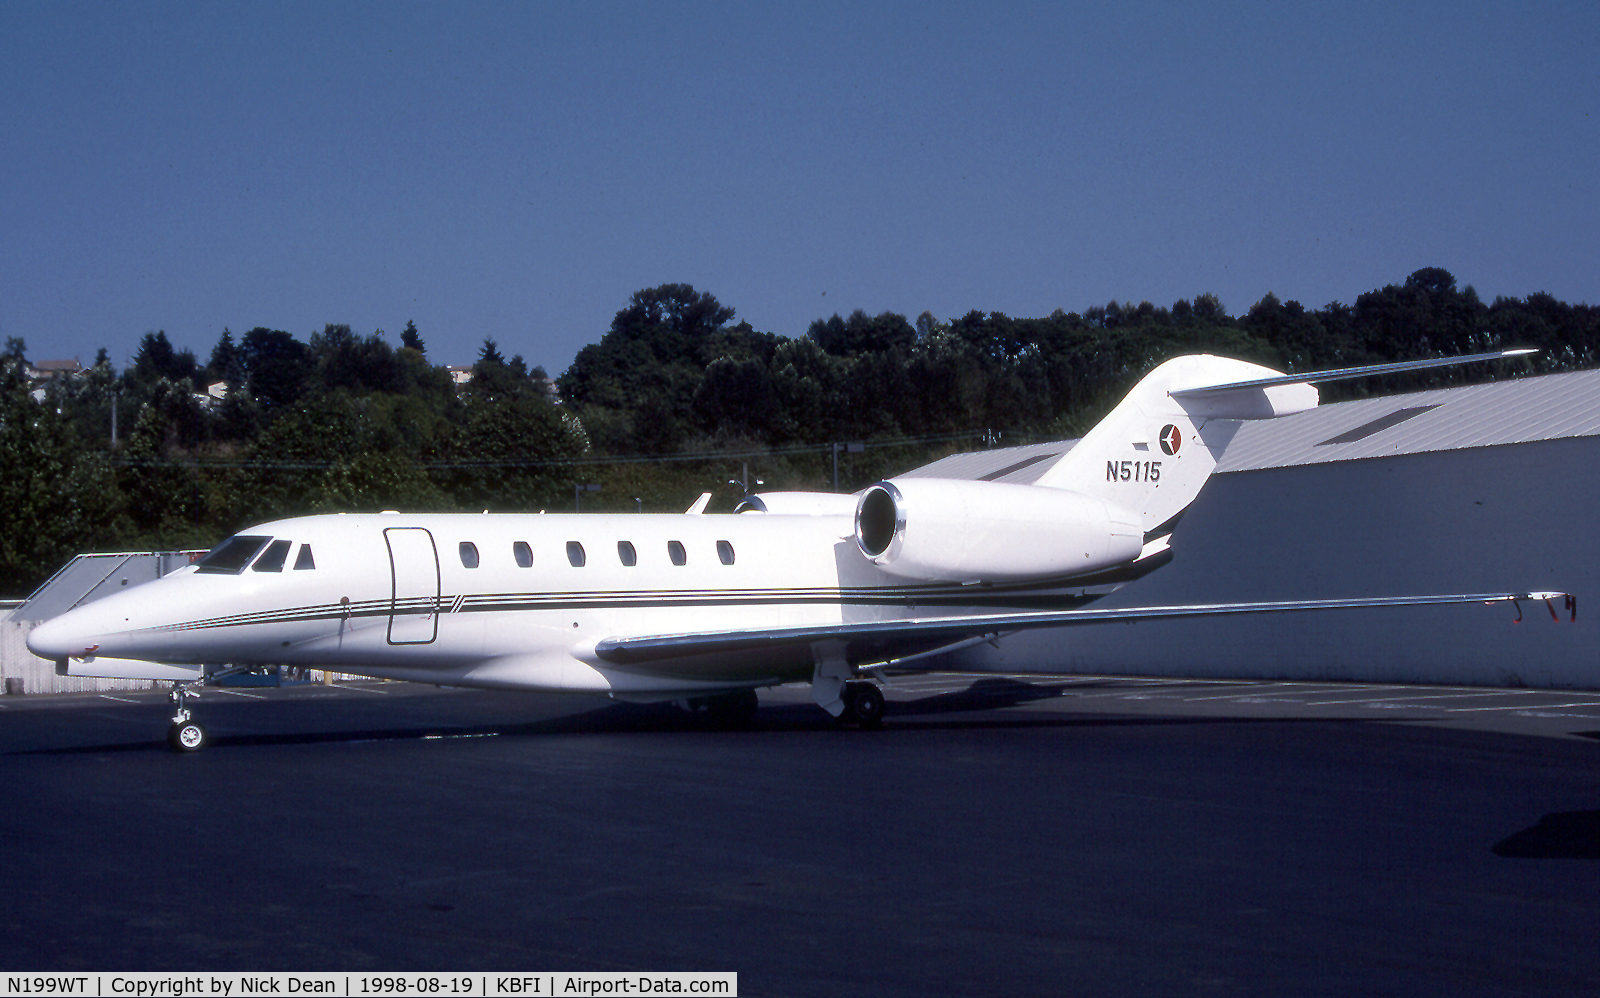 N199WT, 1997 Cessna 750 Citation X C/N 750-0018, KBFI (6 airframes have carried N5115 this Slicer was owned by GM and is currently registered N199WT as posted)